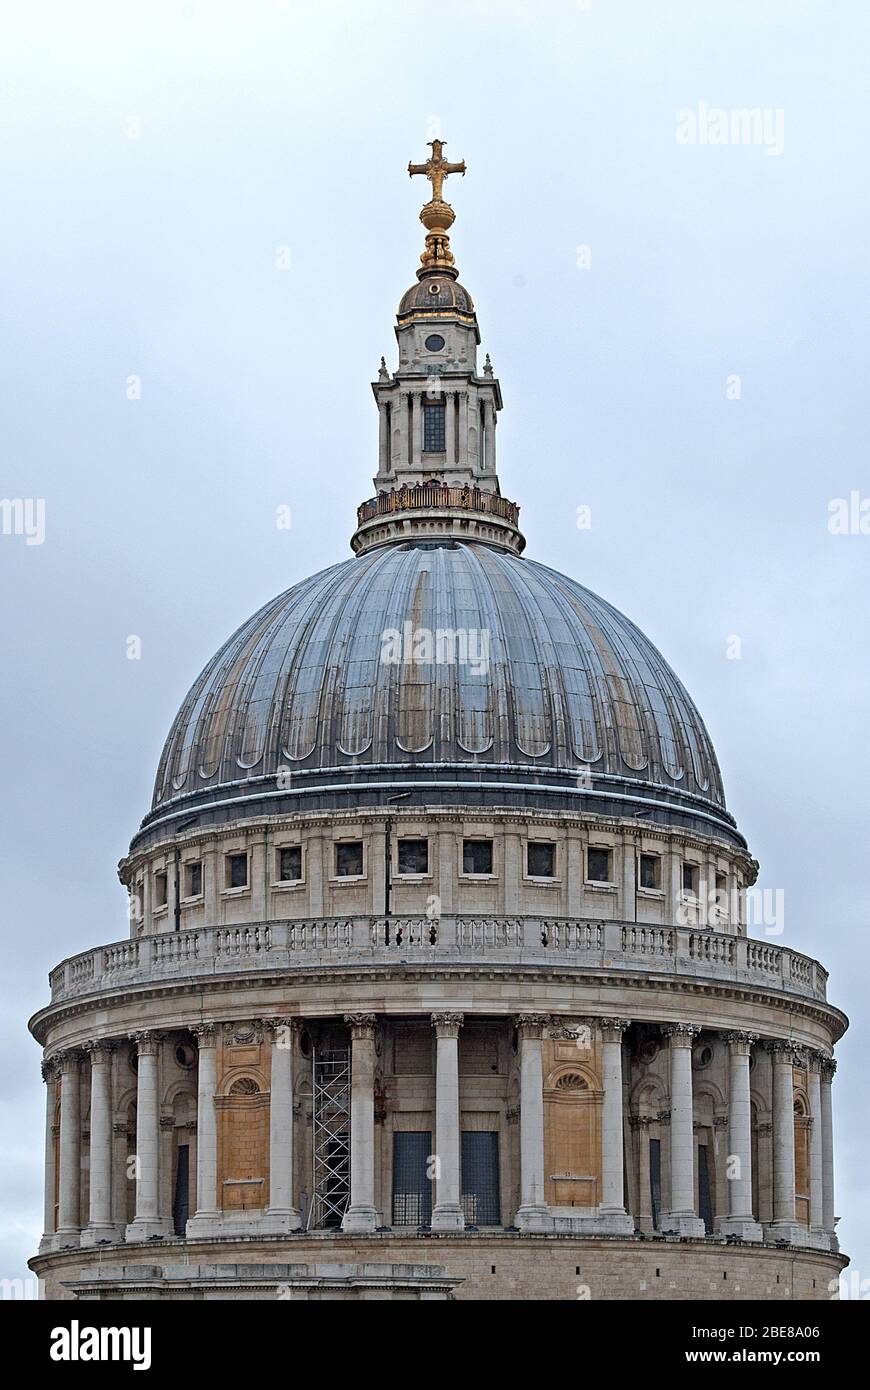 English Baroque Stone Classic Classical Diocese of London St. Paul's Cathedral, Ludgate Hill, London EC4M 8AD by Sir Christopher Wren Architect Stock Photo